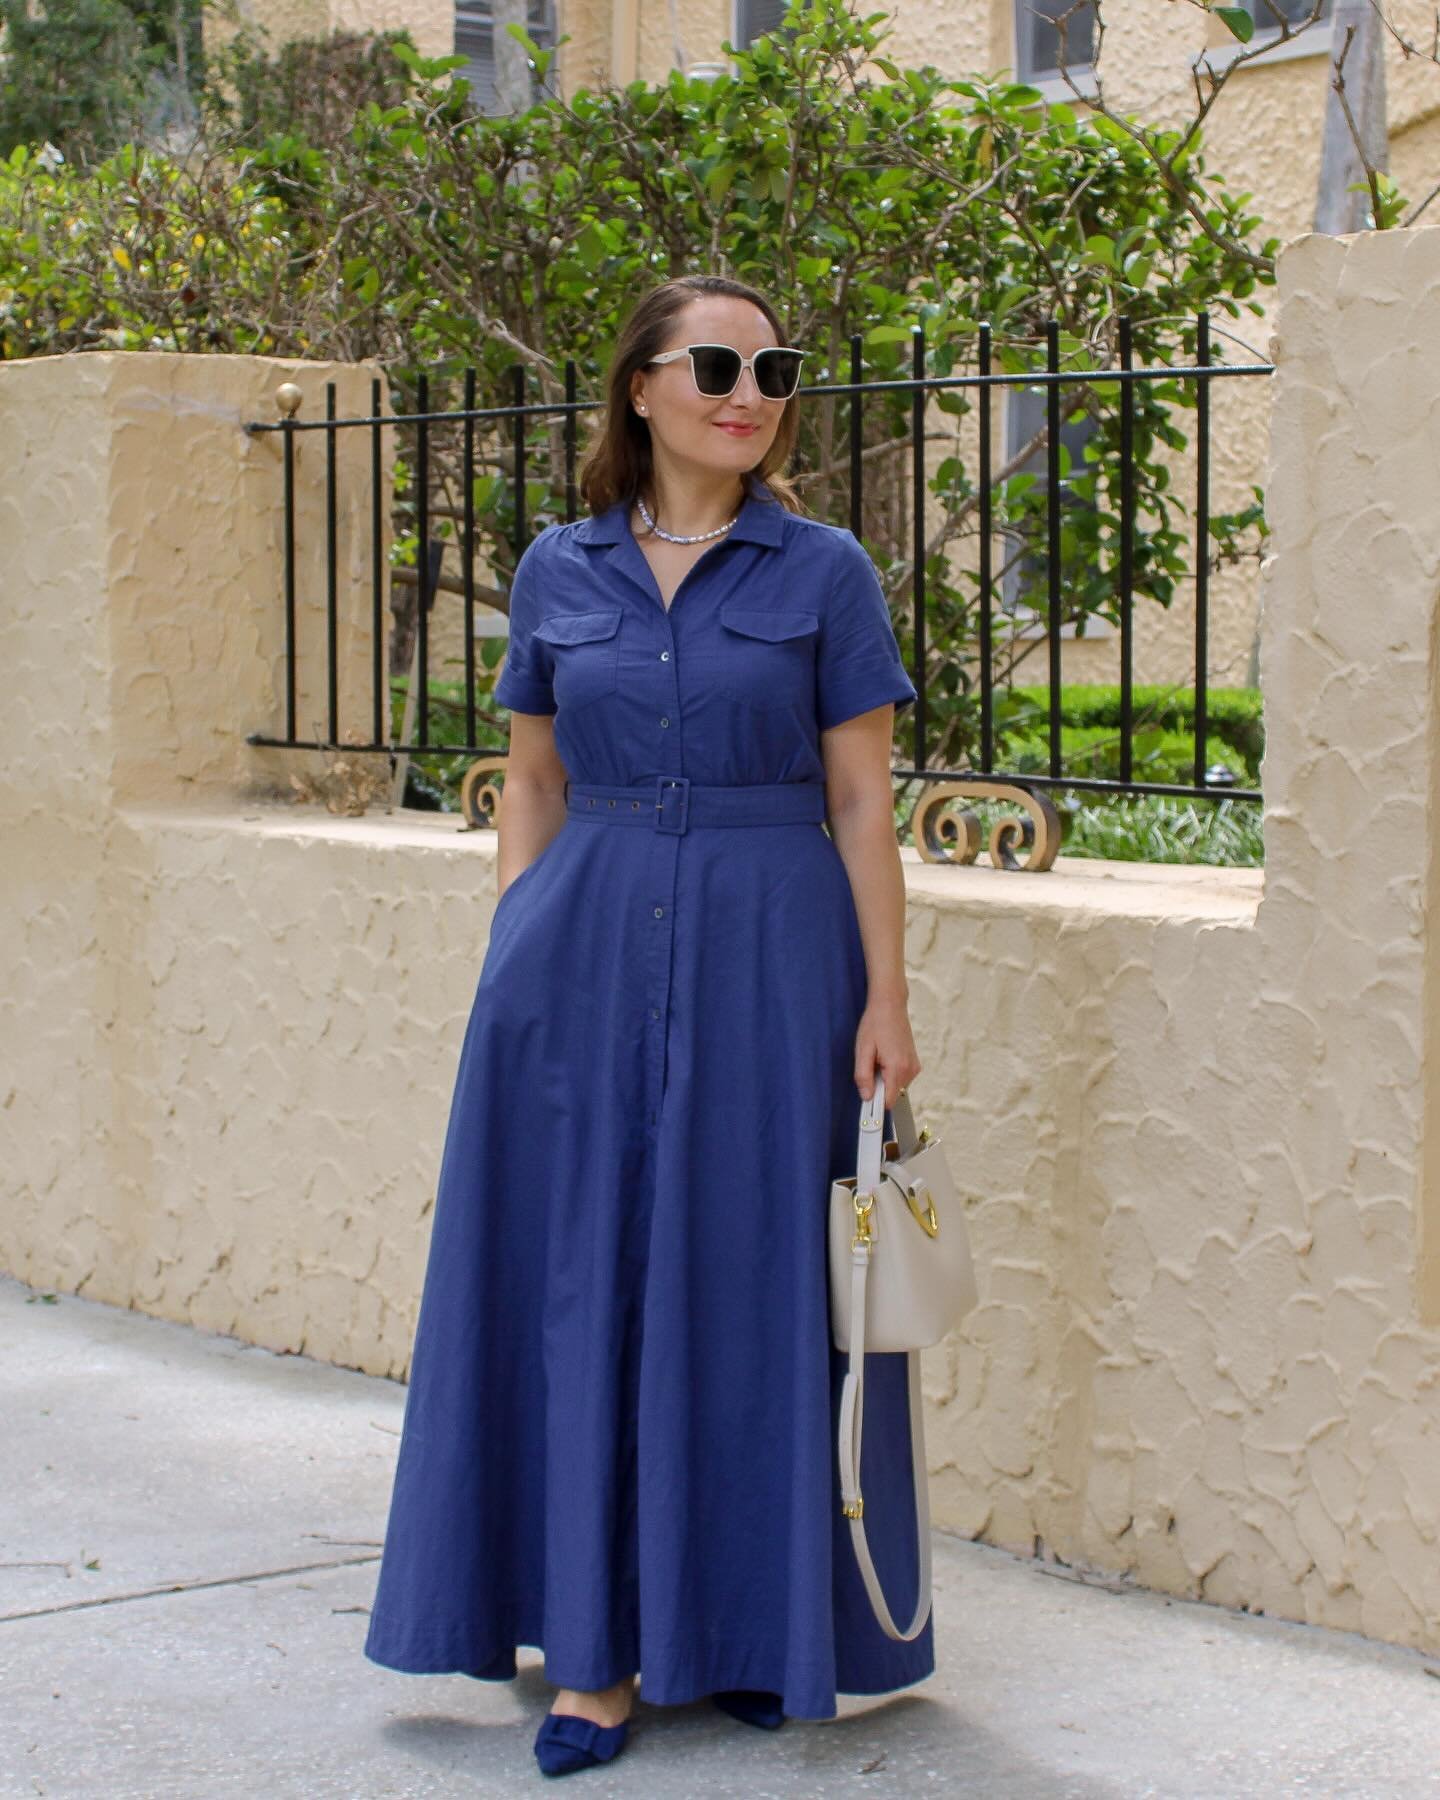 Overdressing is the way to go, in my book. This and many other flowy dresses are on BloomingMagnoliasBlog.com, if you, too, like to overdress 😉. 

#overdressed #dressupdaily #femininestyle #classicstyle #timelessstyle #elegantstyle #wearwhatmakesyou